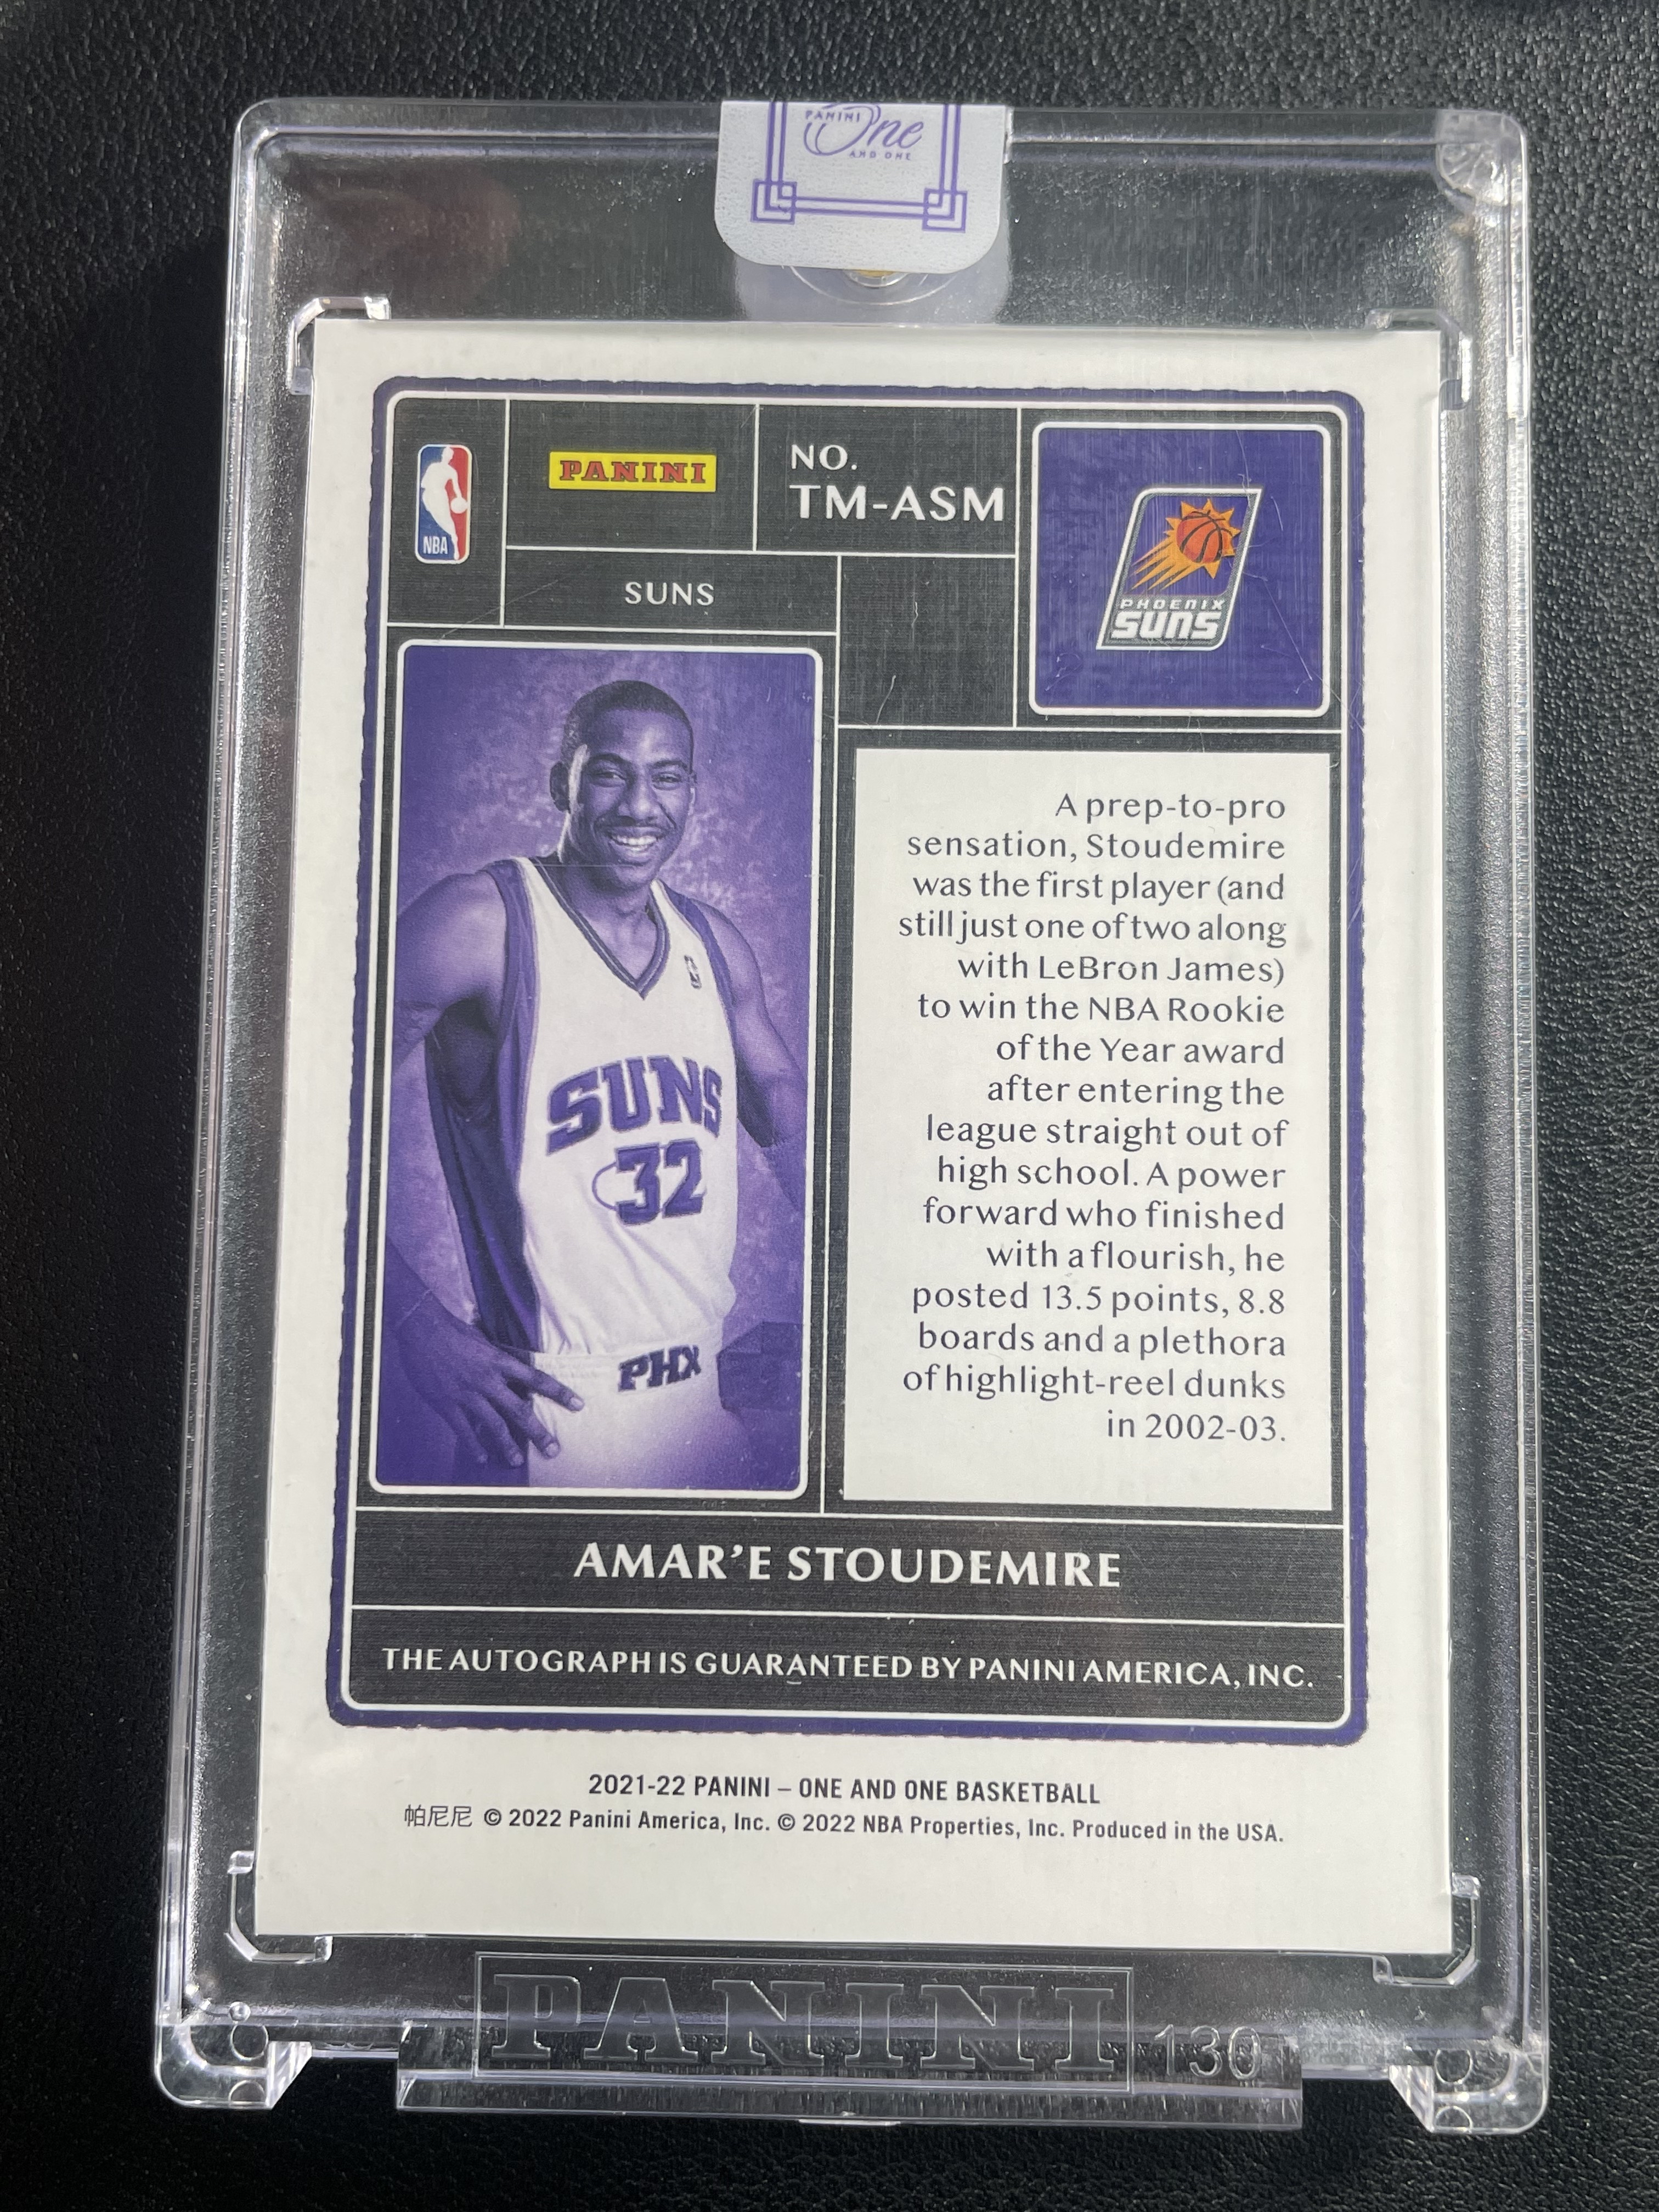 2021-22 Panini One and One Amare Stoudemire 太阳 小斯 斯塔德迈尔 /35编 紫平行 签字卡签 Timeless Moments时刻原封砖Hicard73涛